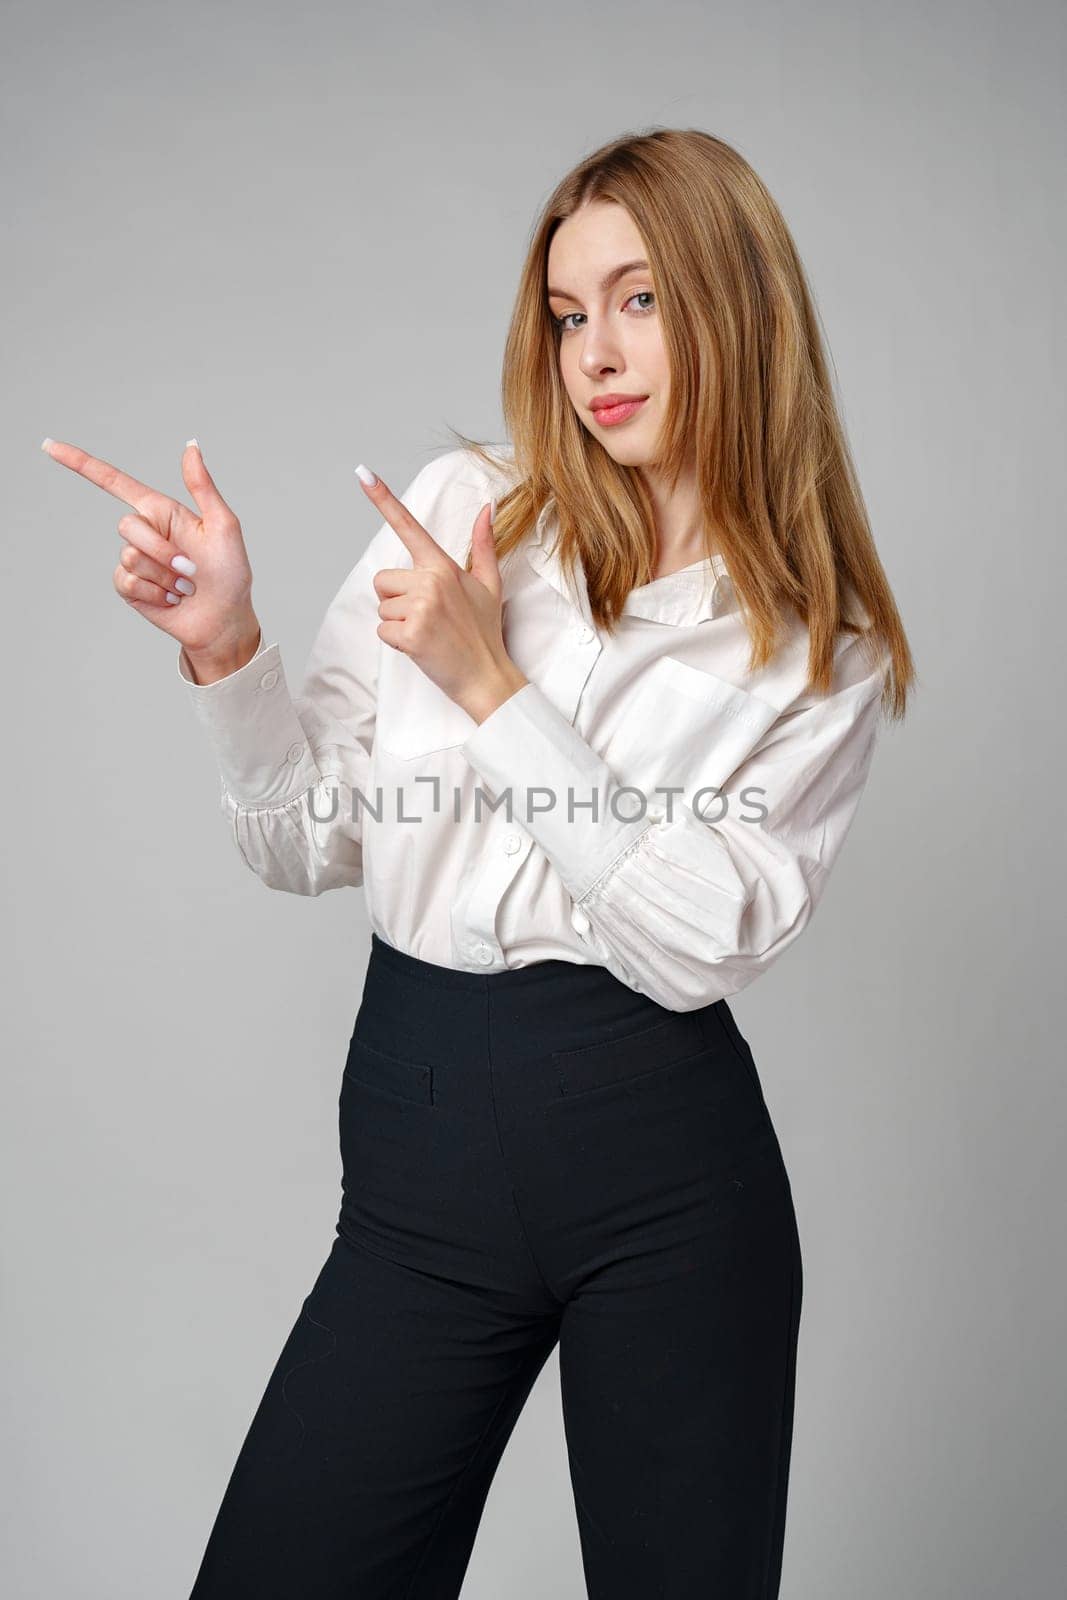 Young blonde woman in formal outfit pointing to the side against gray background in studio